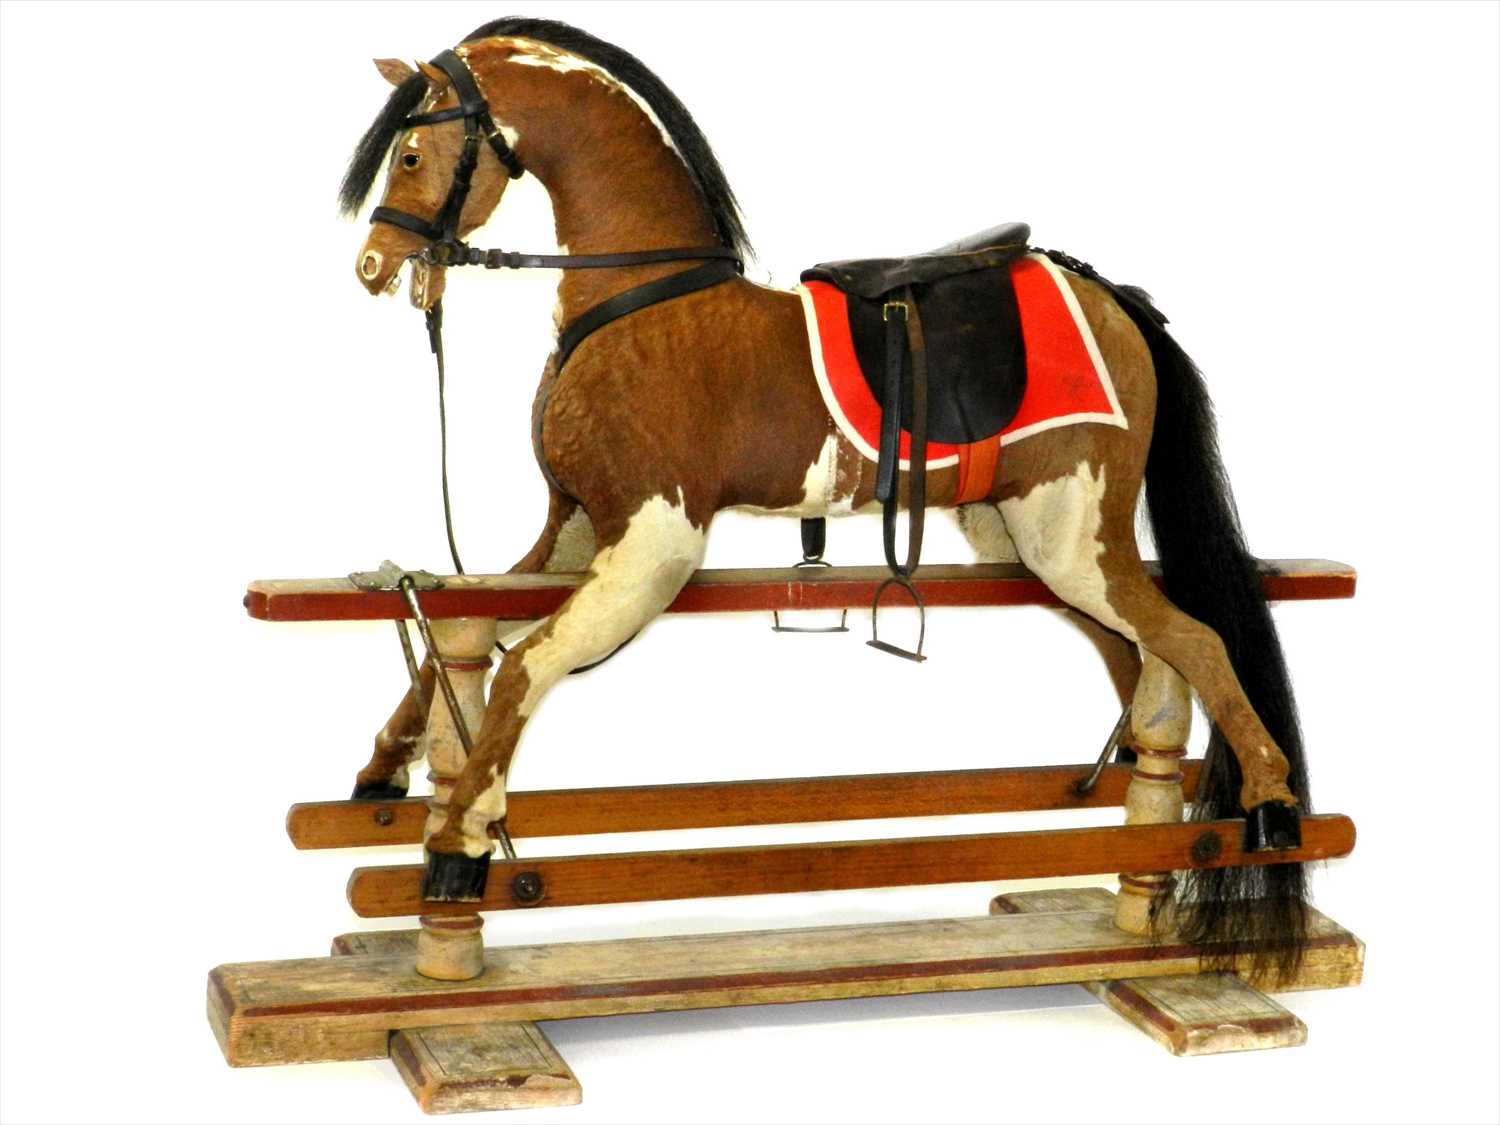 Lot 653 - “Brown Jack” a professionally restored Bauer & Krause 1920s Rocking Horse